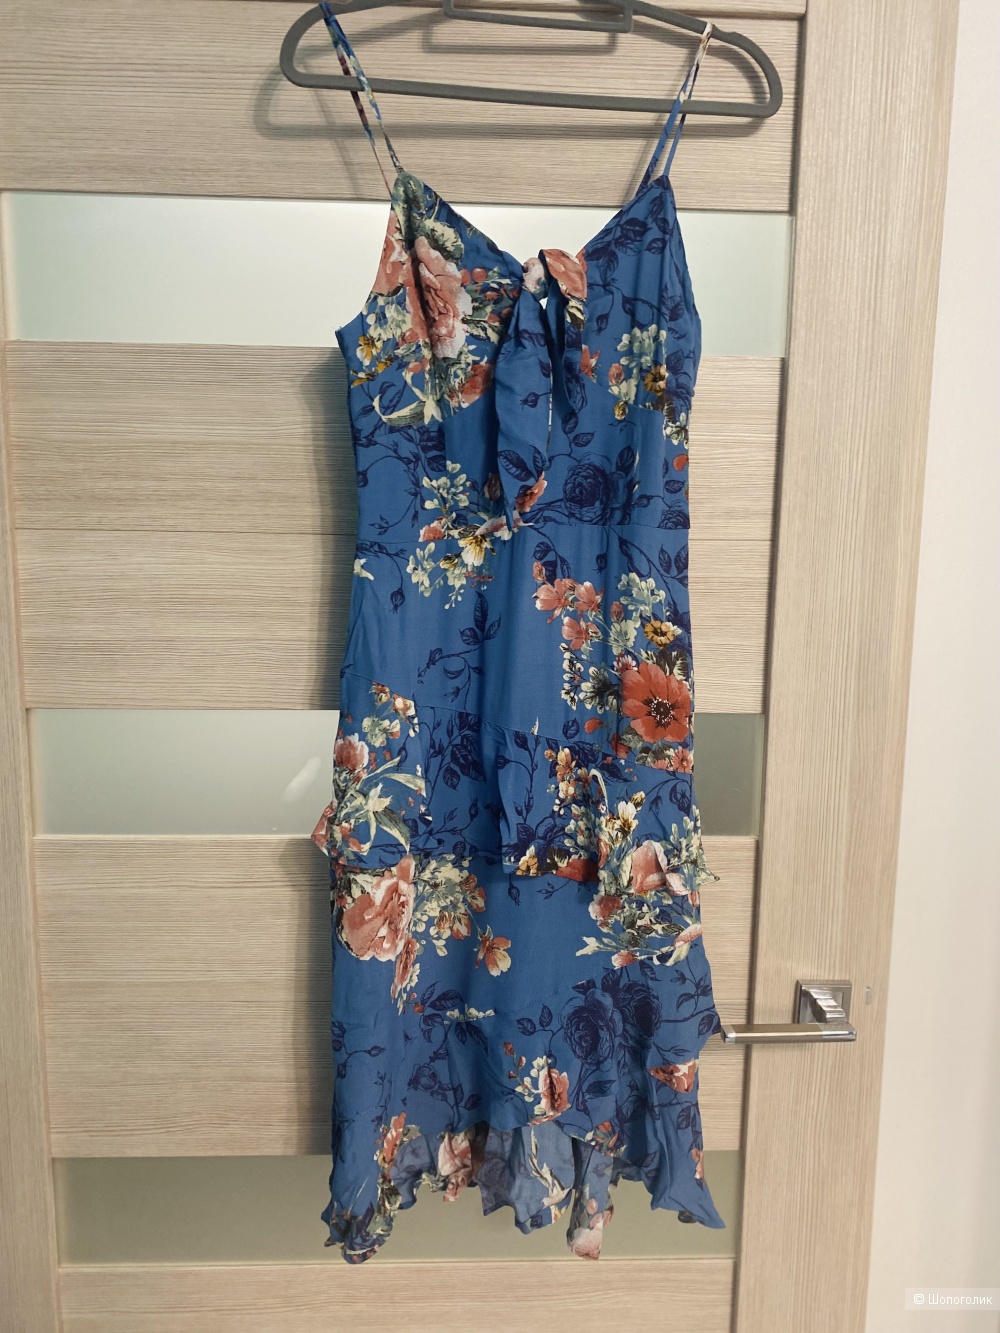 Платье Lottie And Holly frill detail floral print midi dress in blue размер M. Росс. 44-46